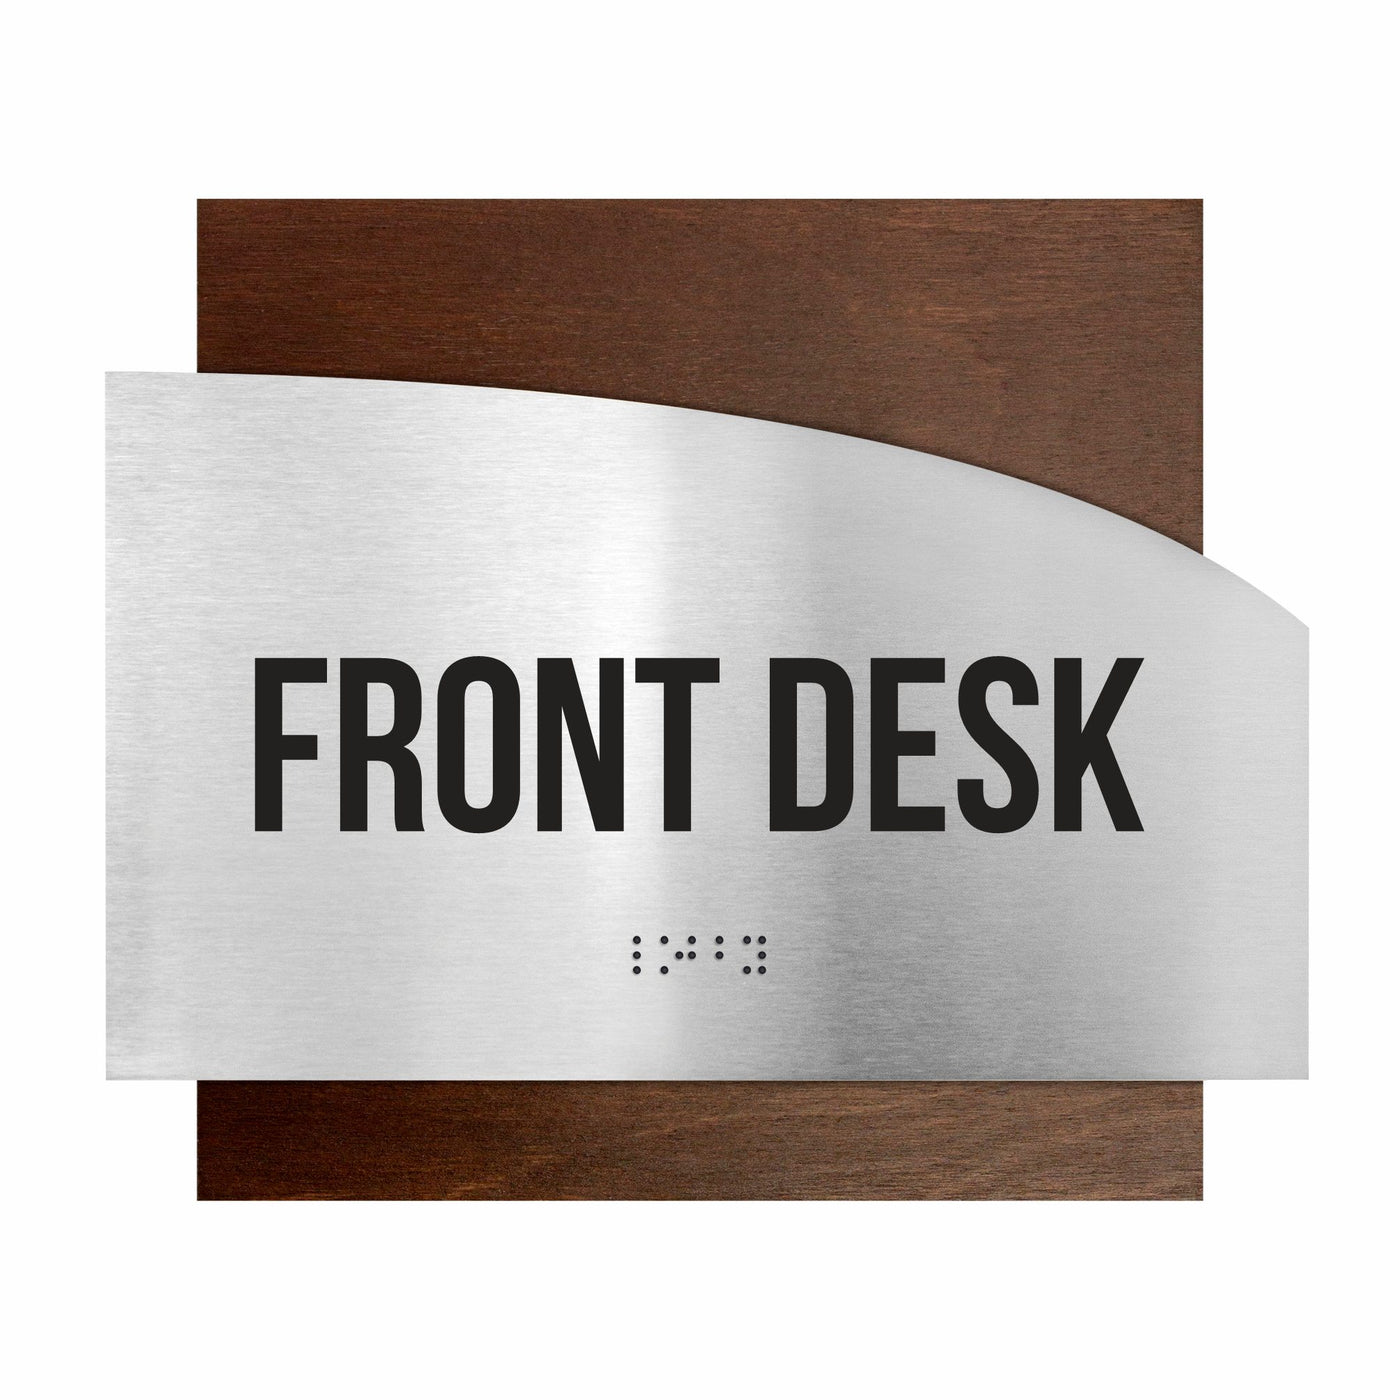 Door Signs - Front Desk Signs - Stainless Steel & Wood Plate - "Wave" Design